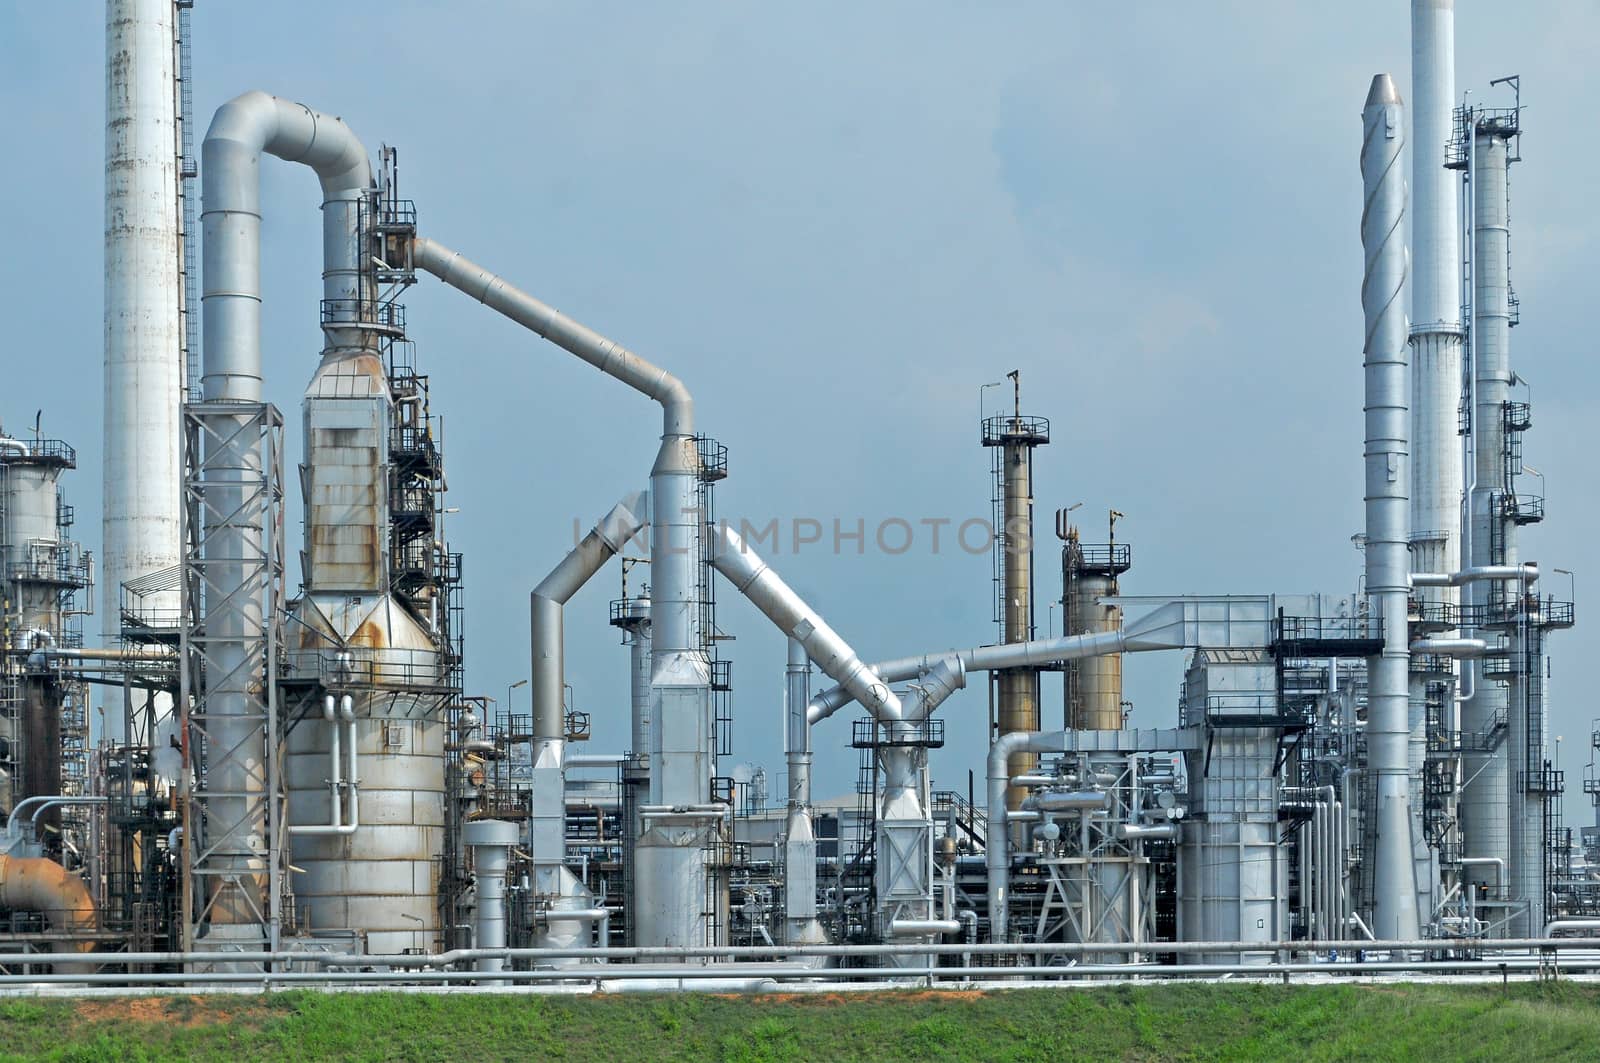 Oil Refinery factory morning